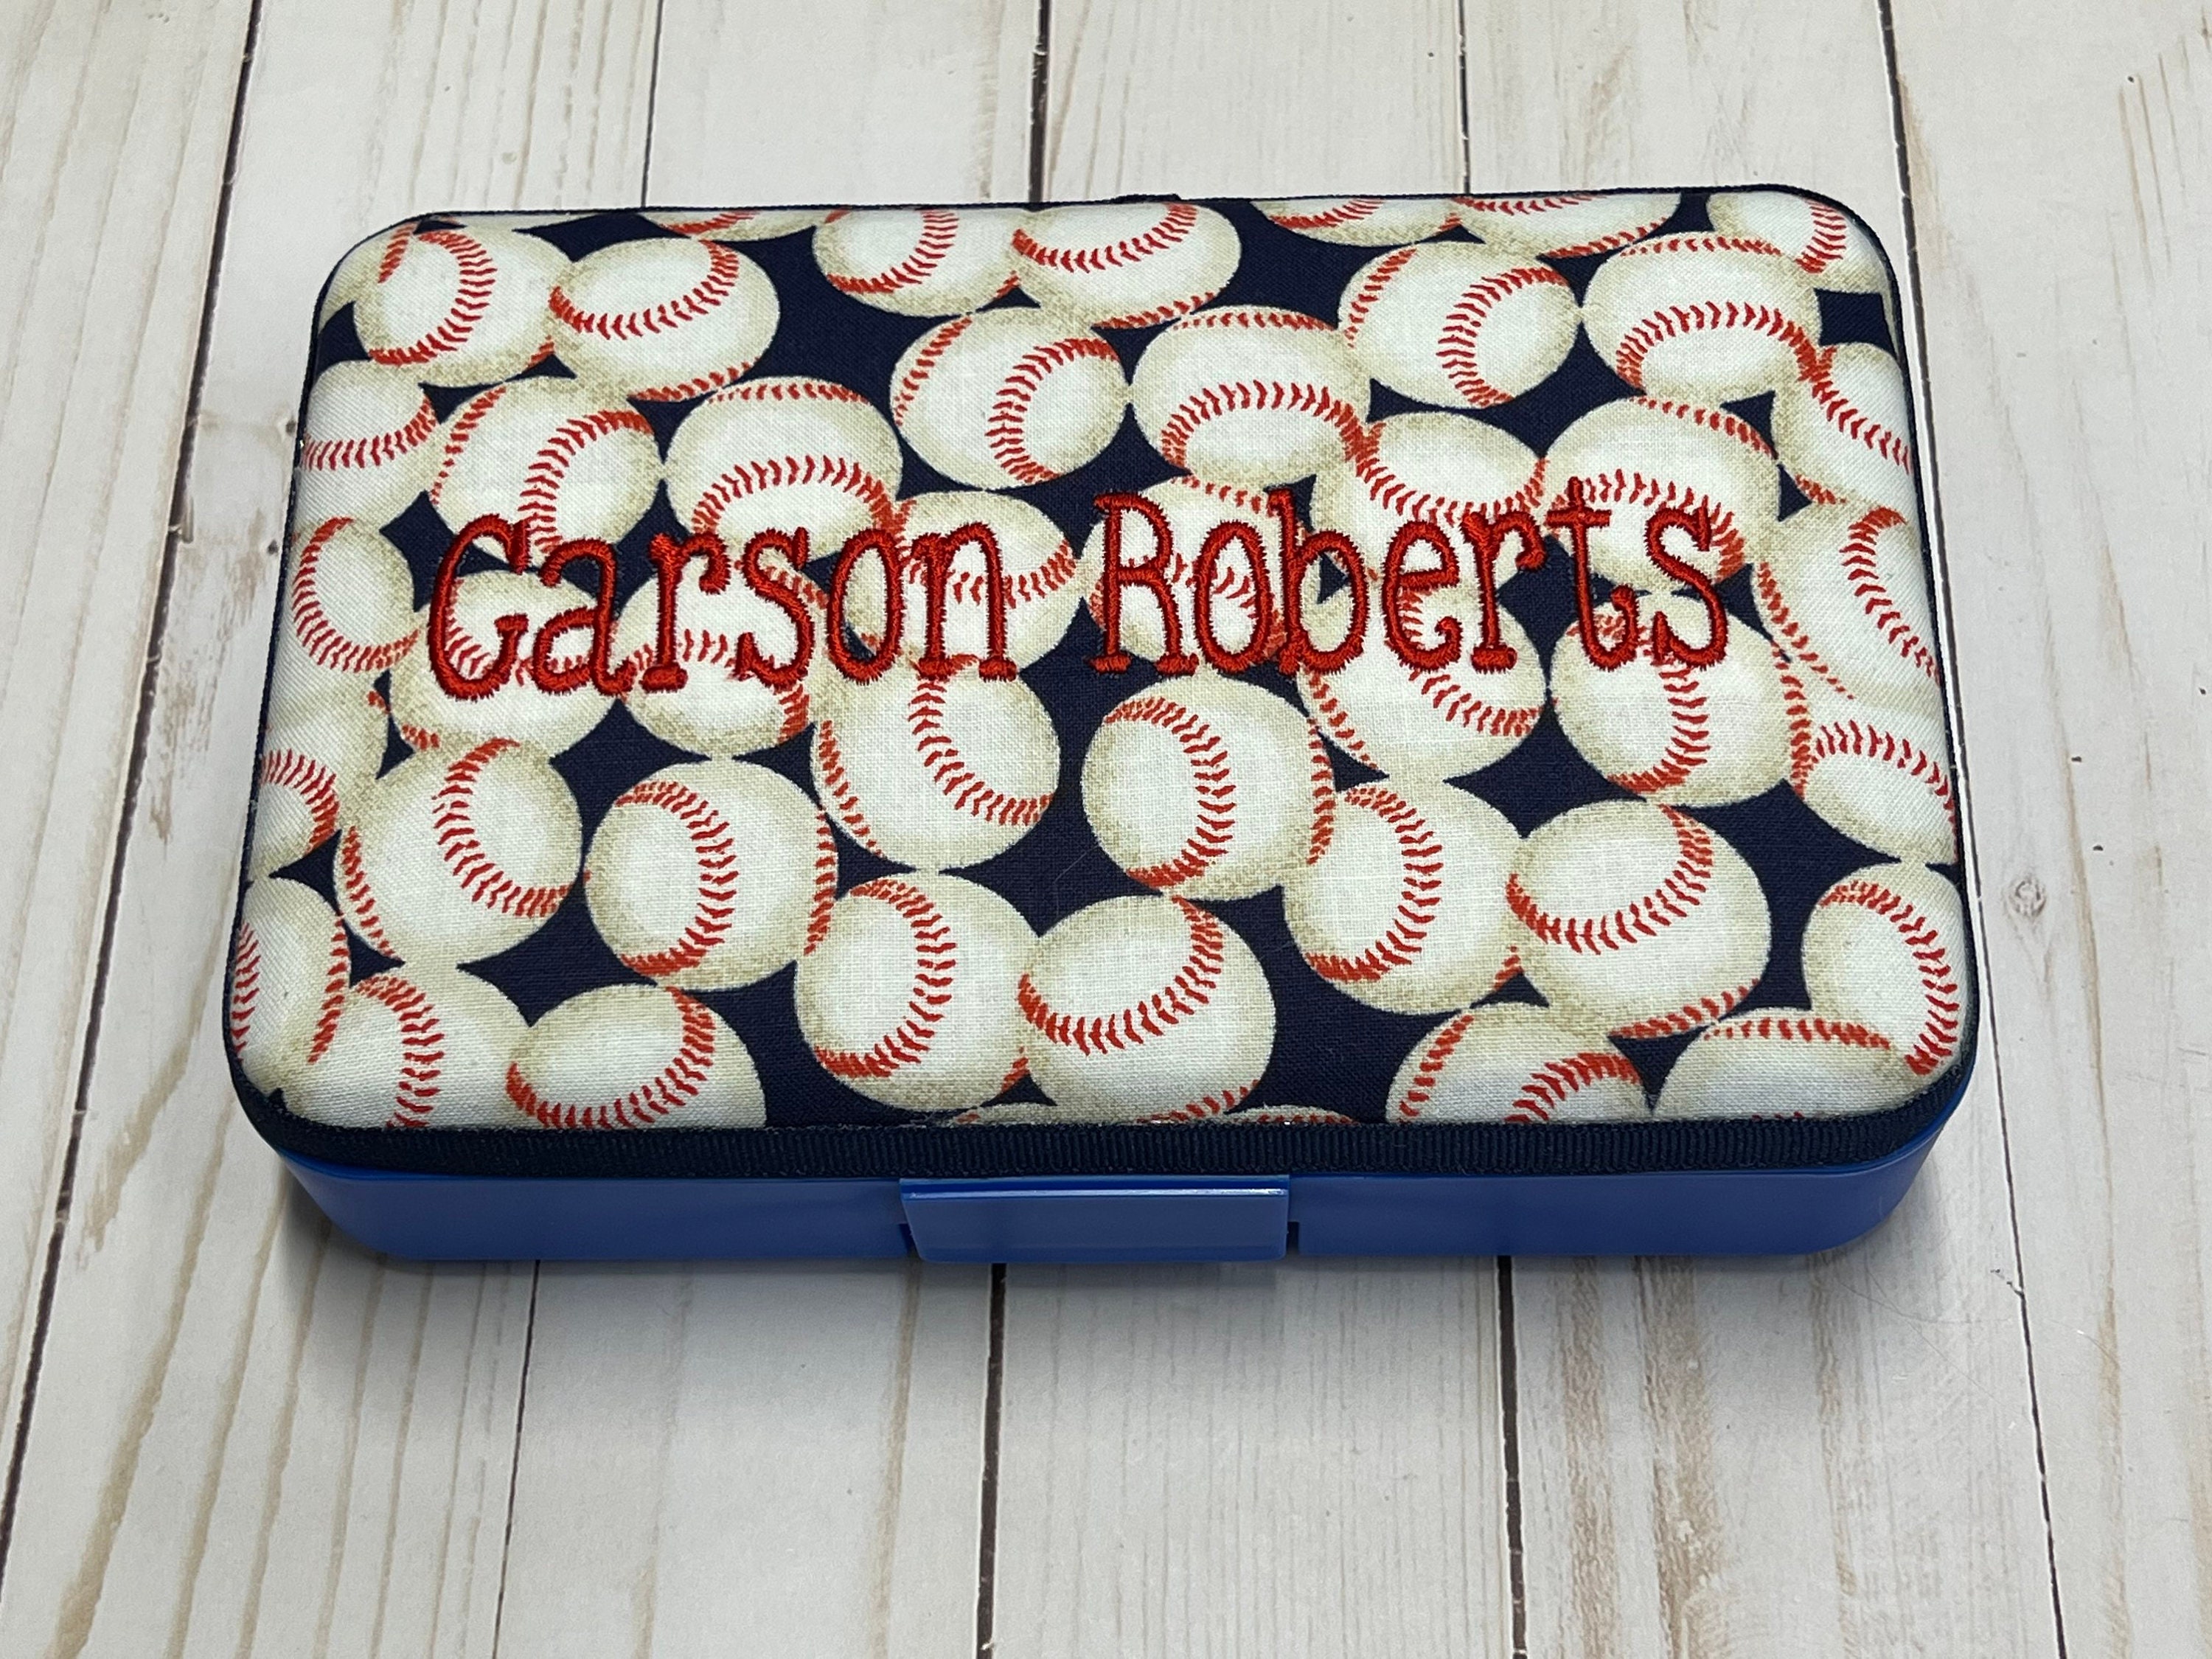 Personalized Embroidered Kids Pencil Box Art Supplies Baseball Sports